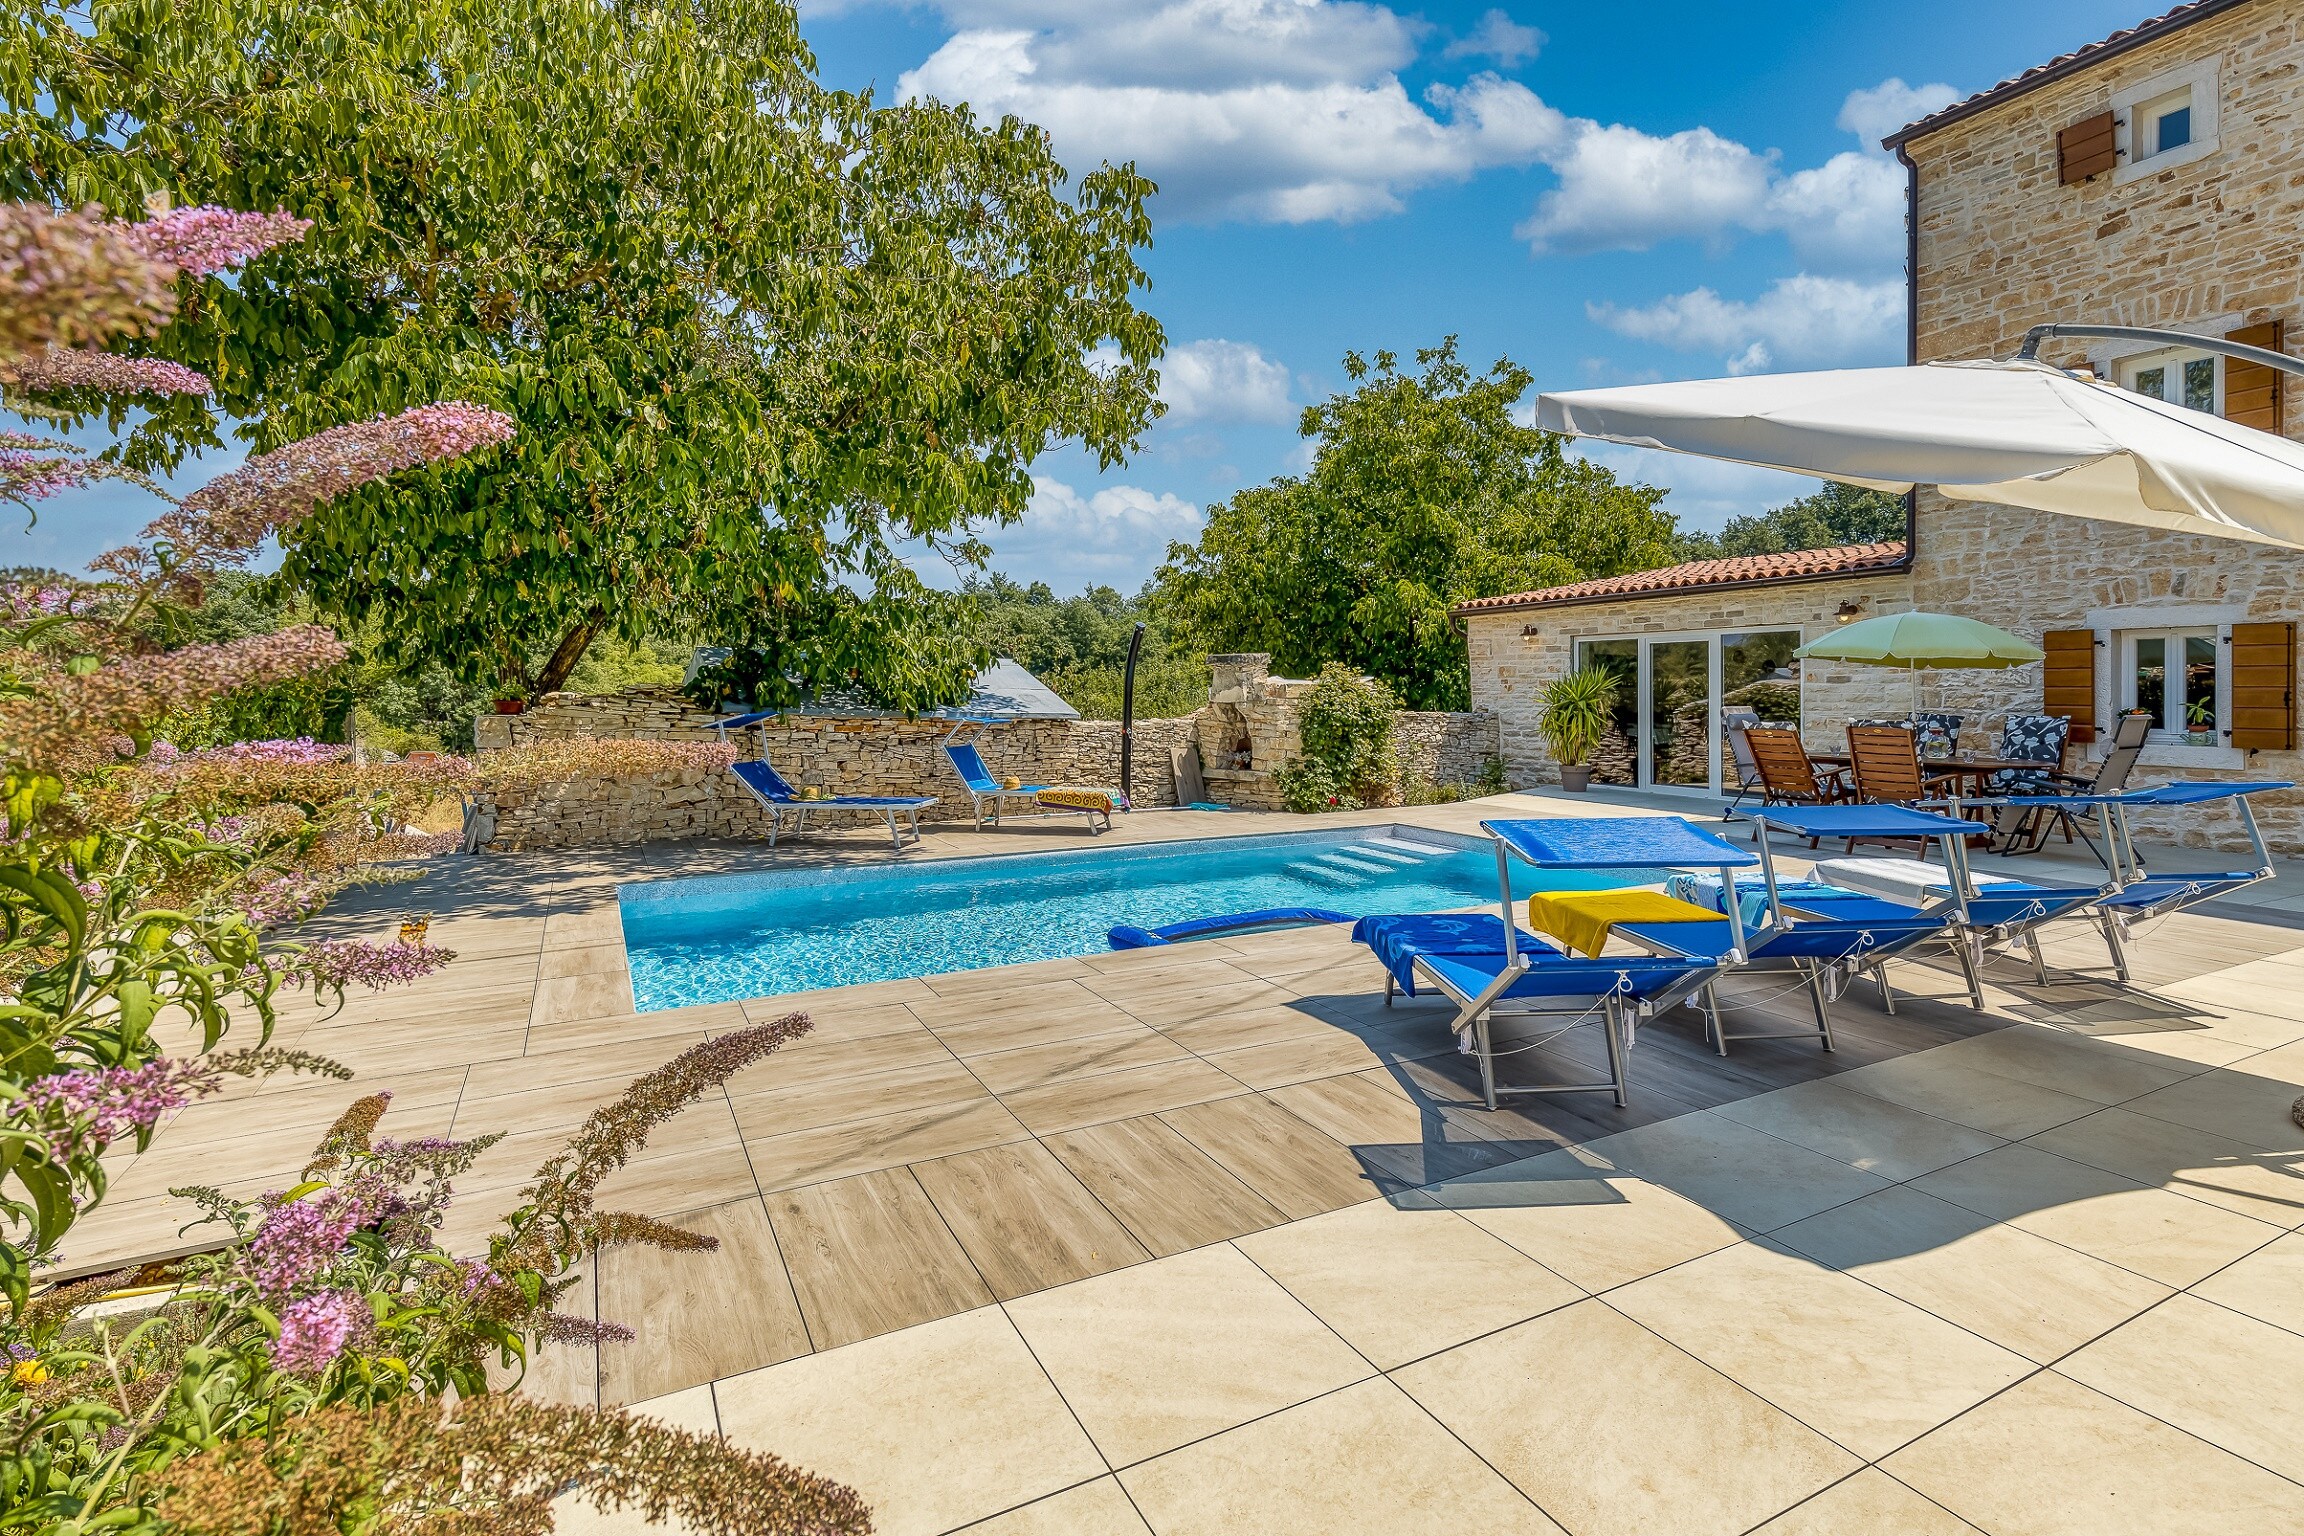 Property Image 2 - Poolincluded - Villa Butterfly